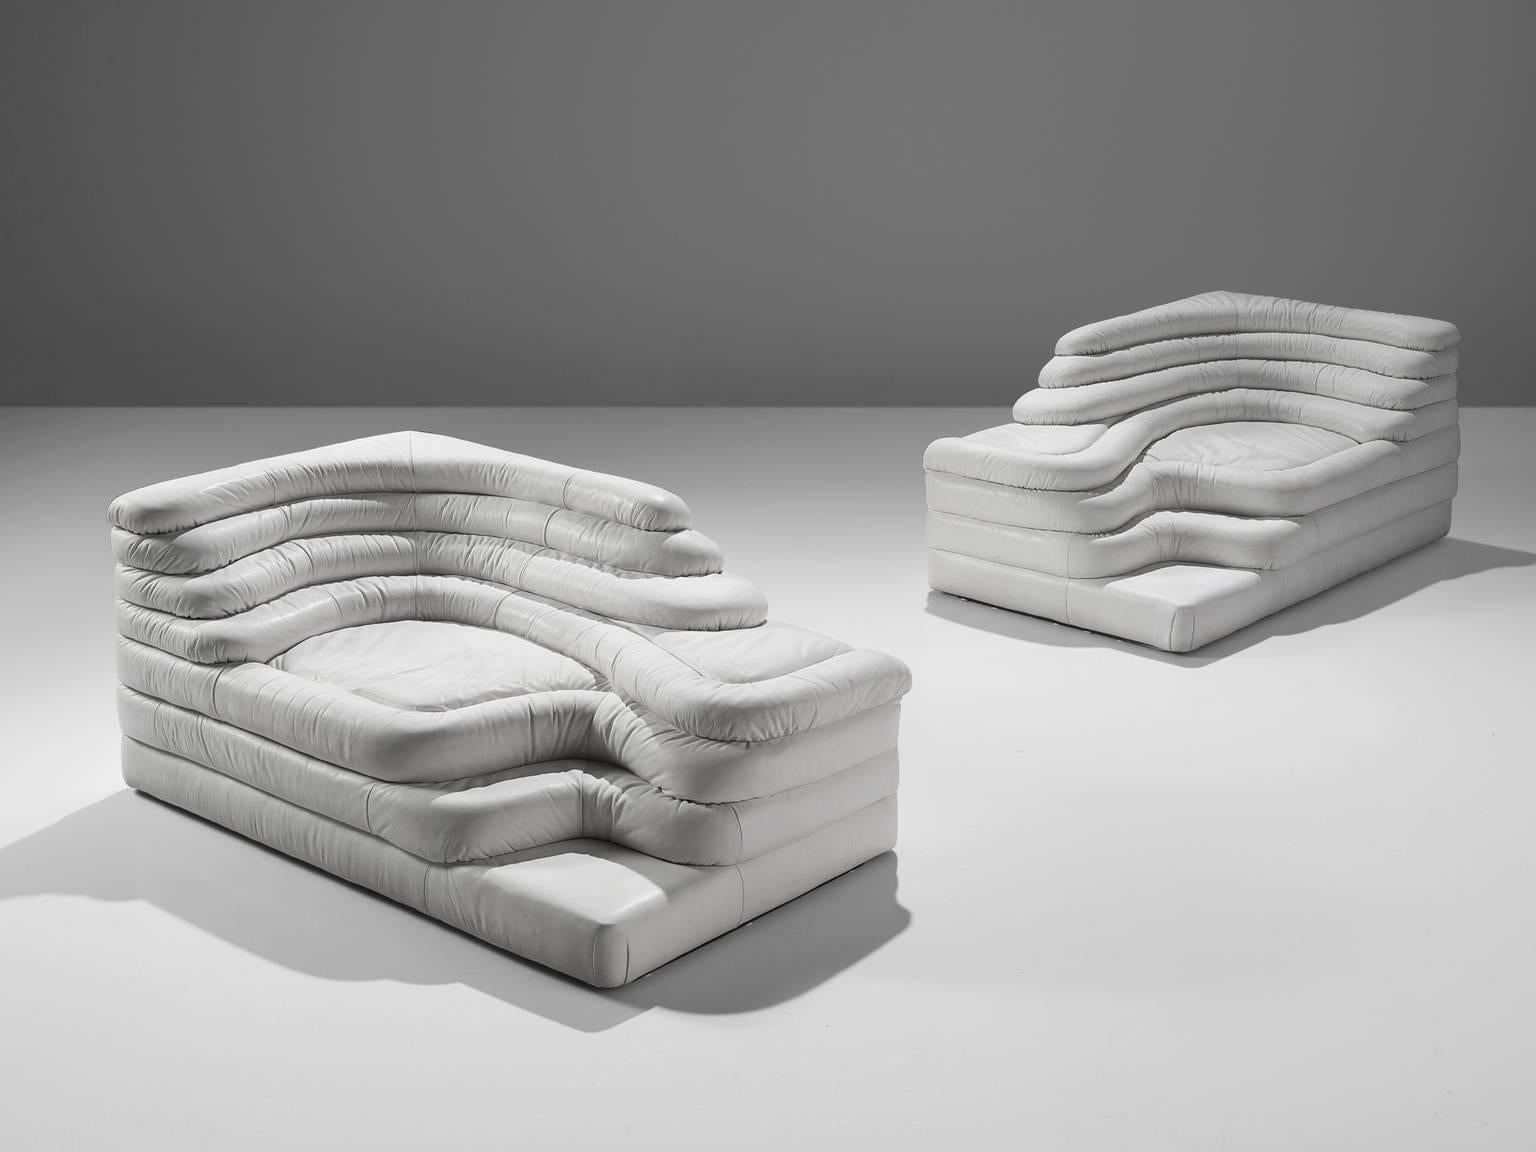 Pair of DS1025 'Terrazza' landscape elements, in white high quality leather, by Ubald Klug for De Sede, Switzerland, 1970s. 

Waterfall shaped sofa in white to grey leather by the Swiss manufacturer De Sede. The leather is in outstandingly good